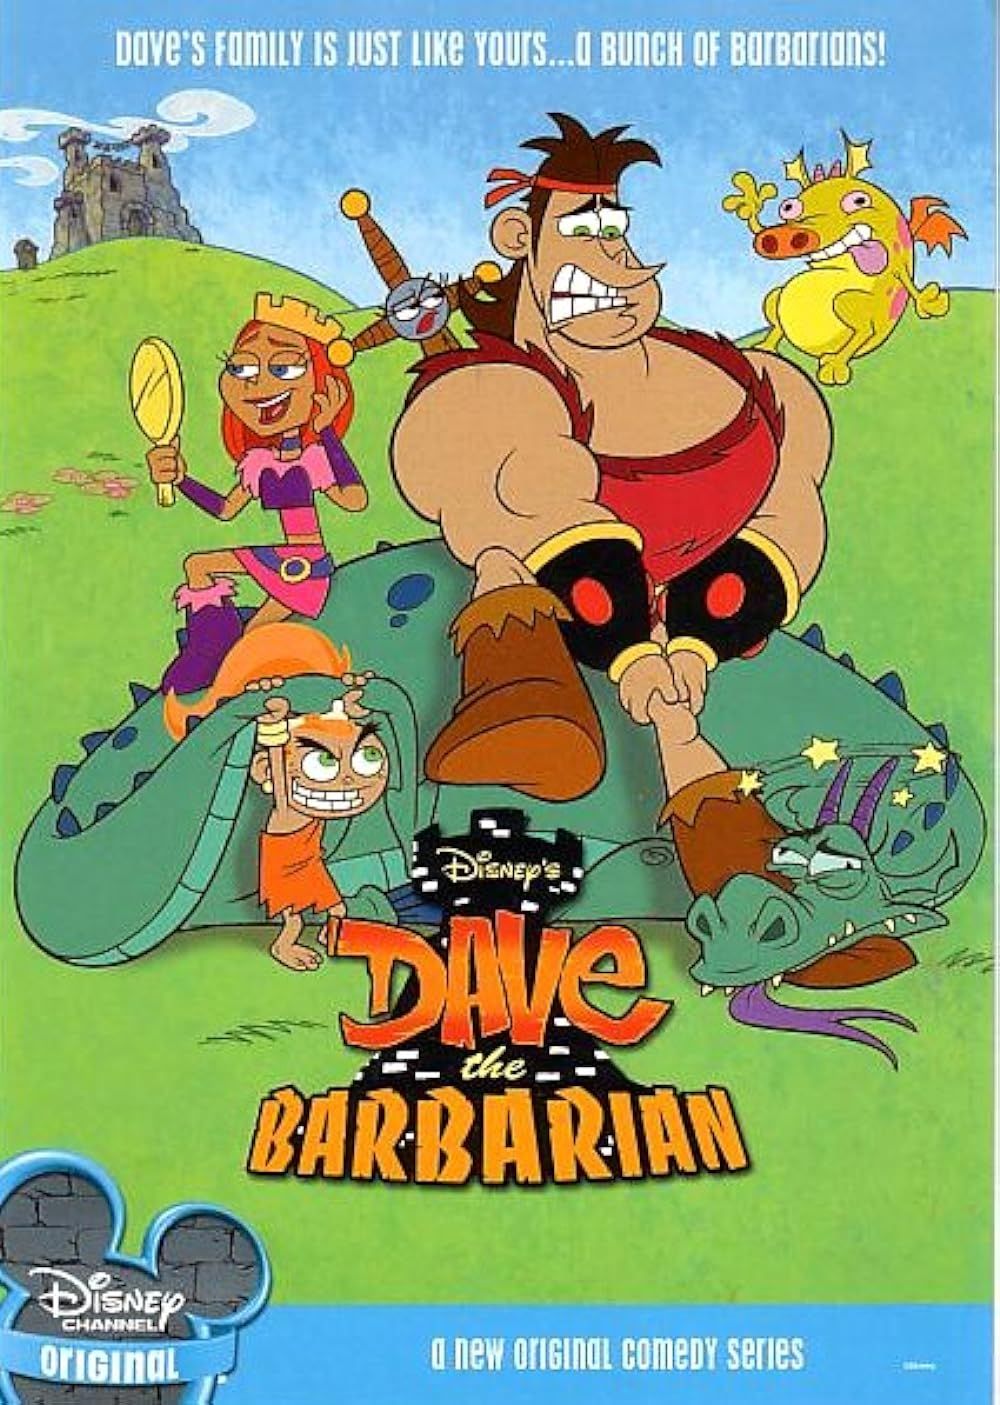 Disney's Dave the Barbarian (2004) cast in the official poster